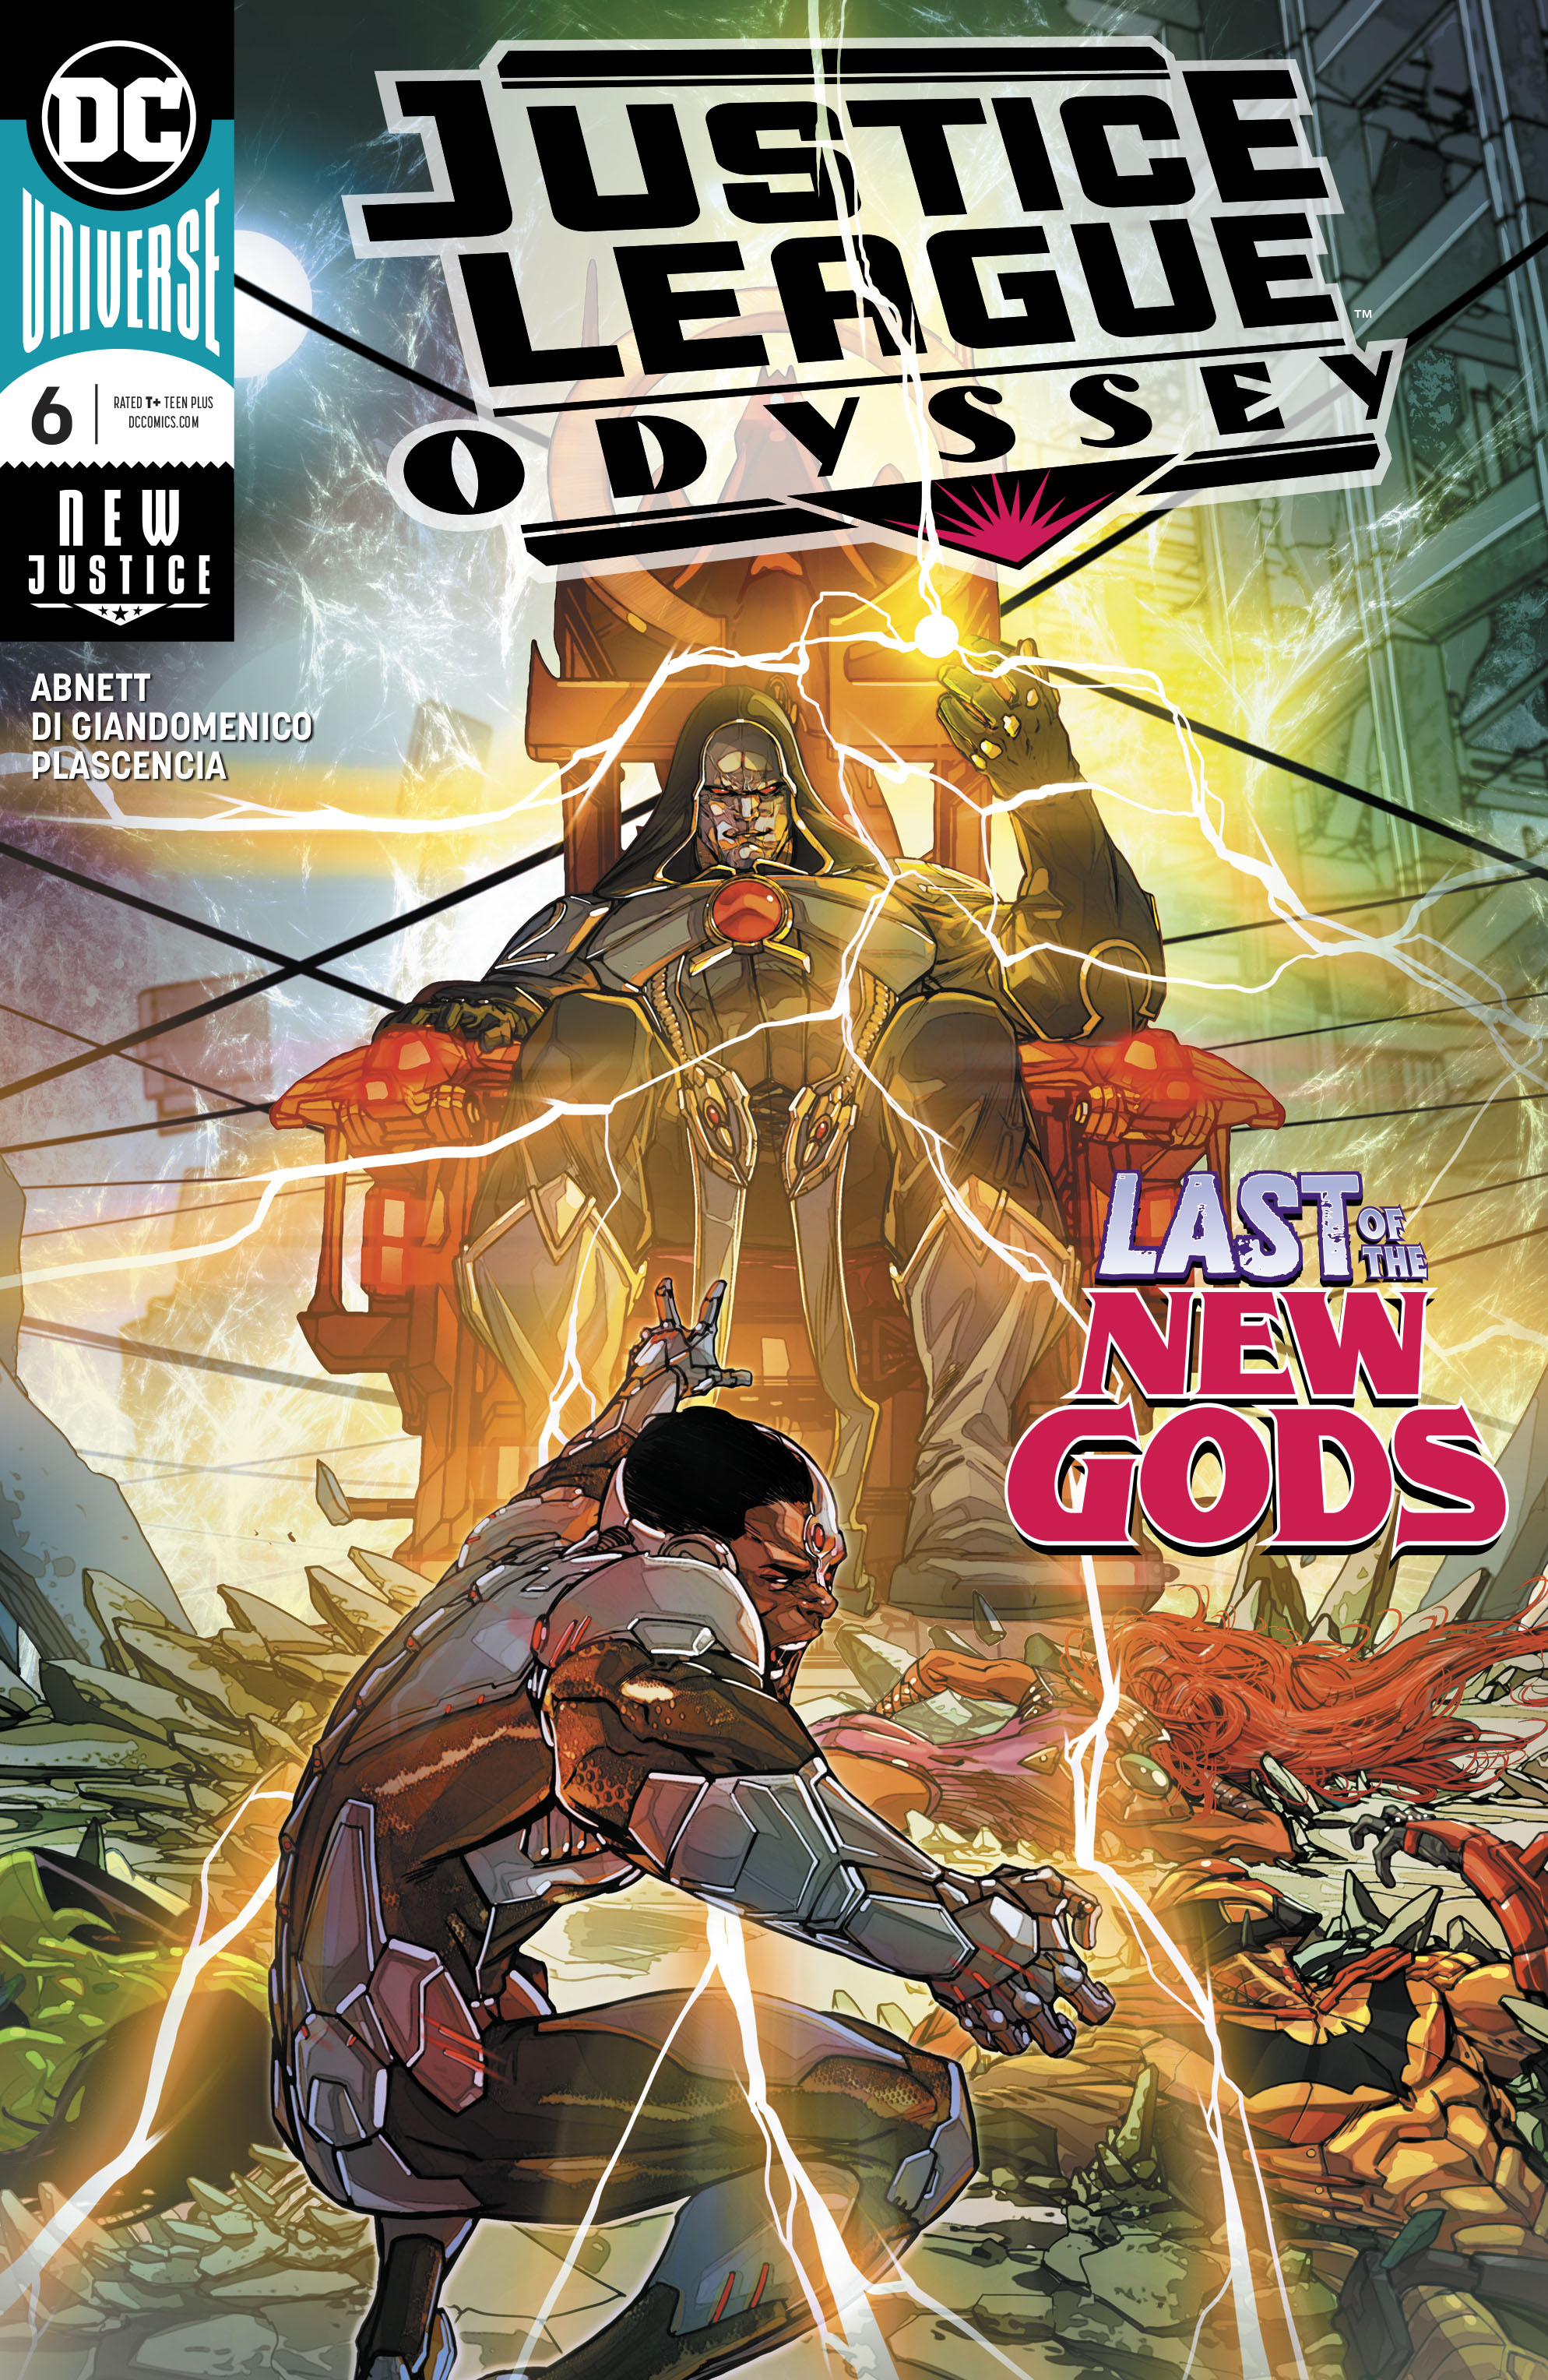 Read online Justice League Odyssey comic -  Issue #6 - 1